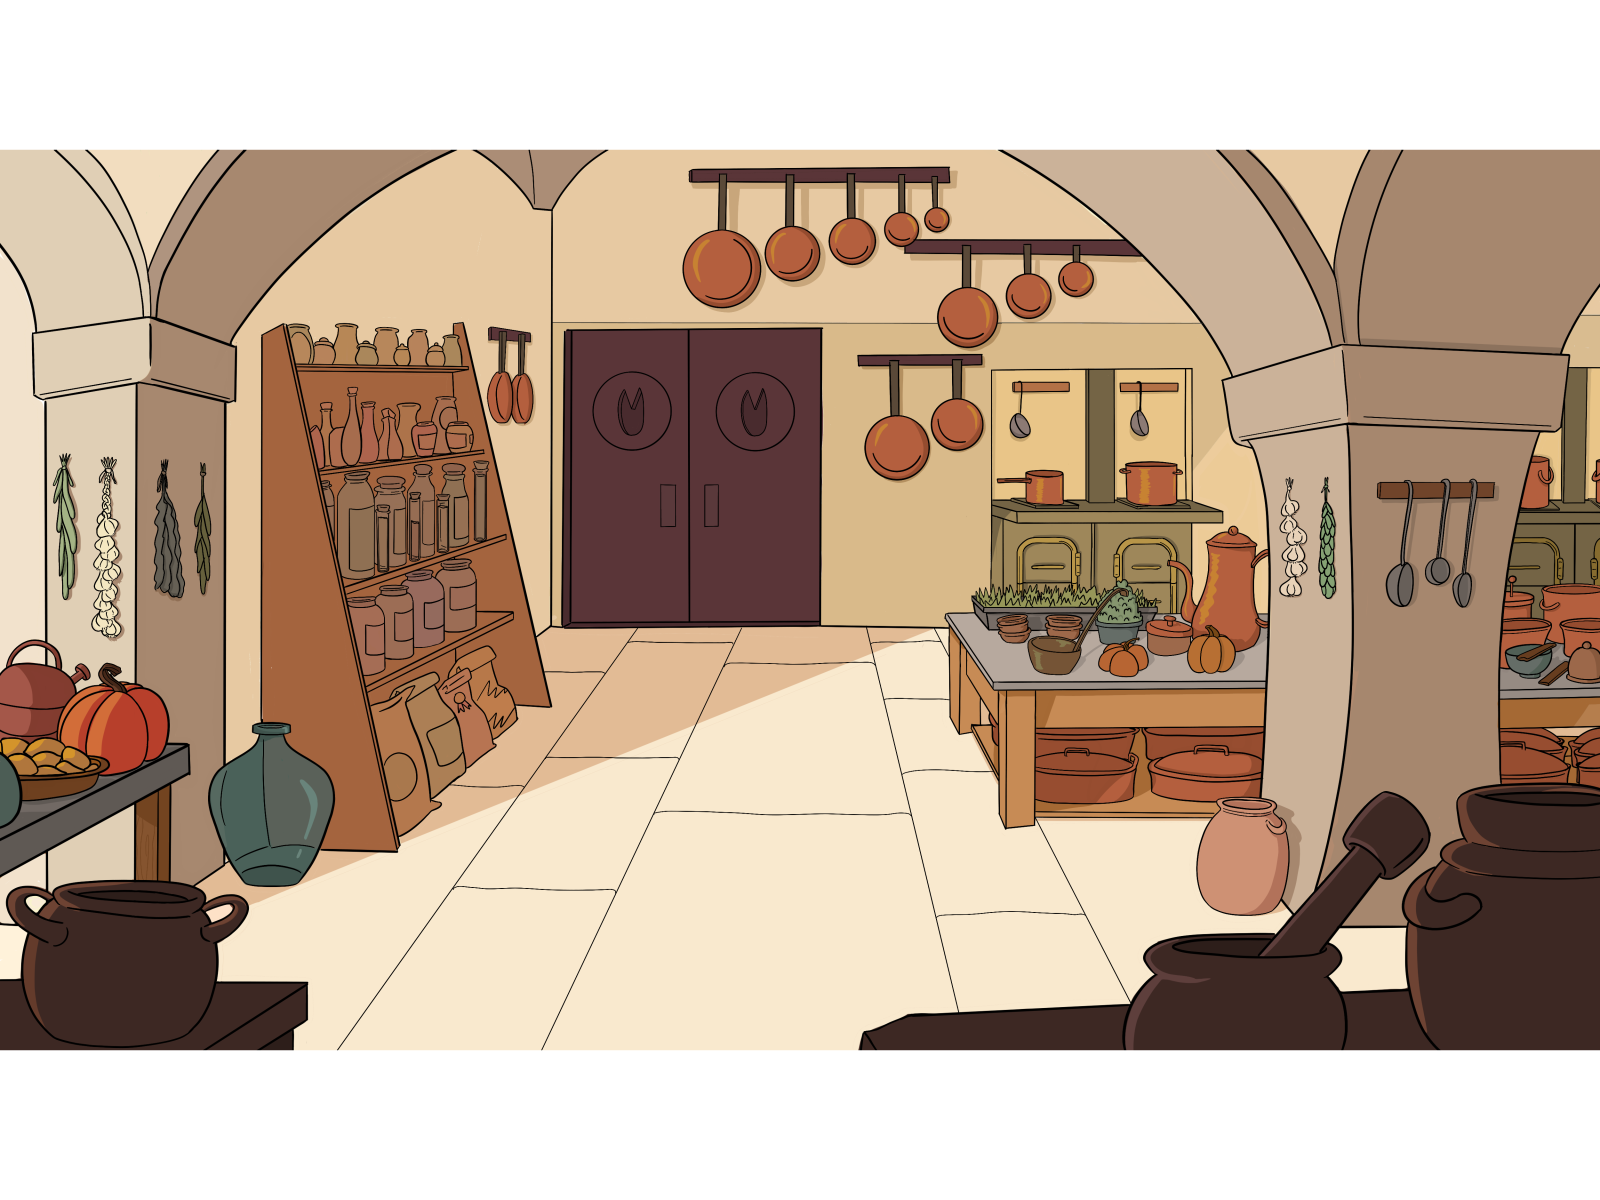 Copper Kitchen fit for a palace by Heather Hughes on Dribbble